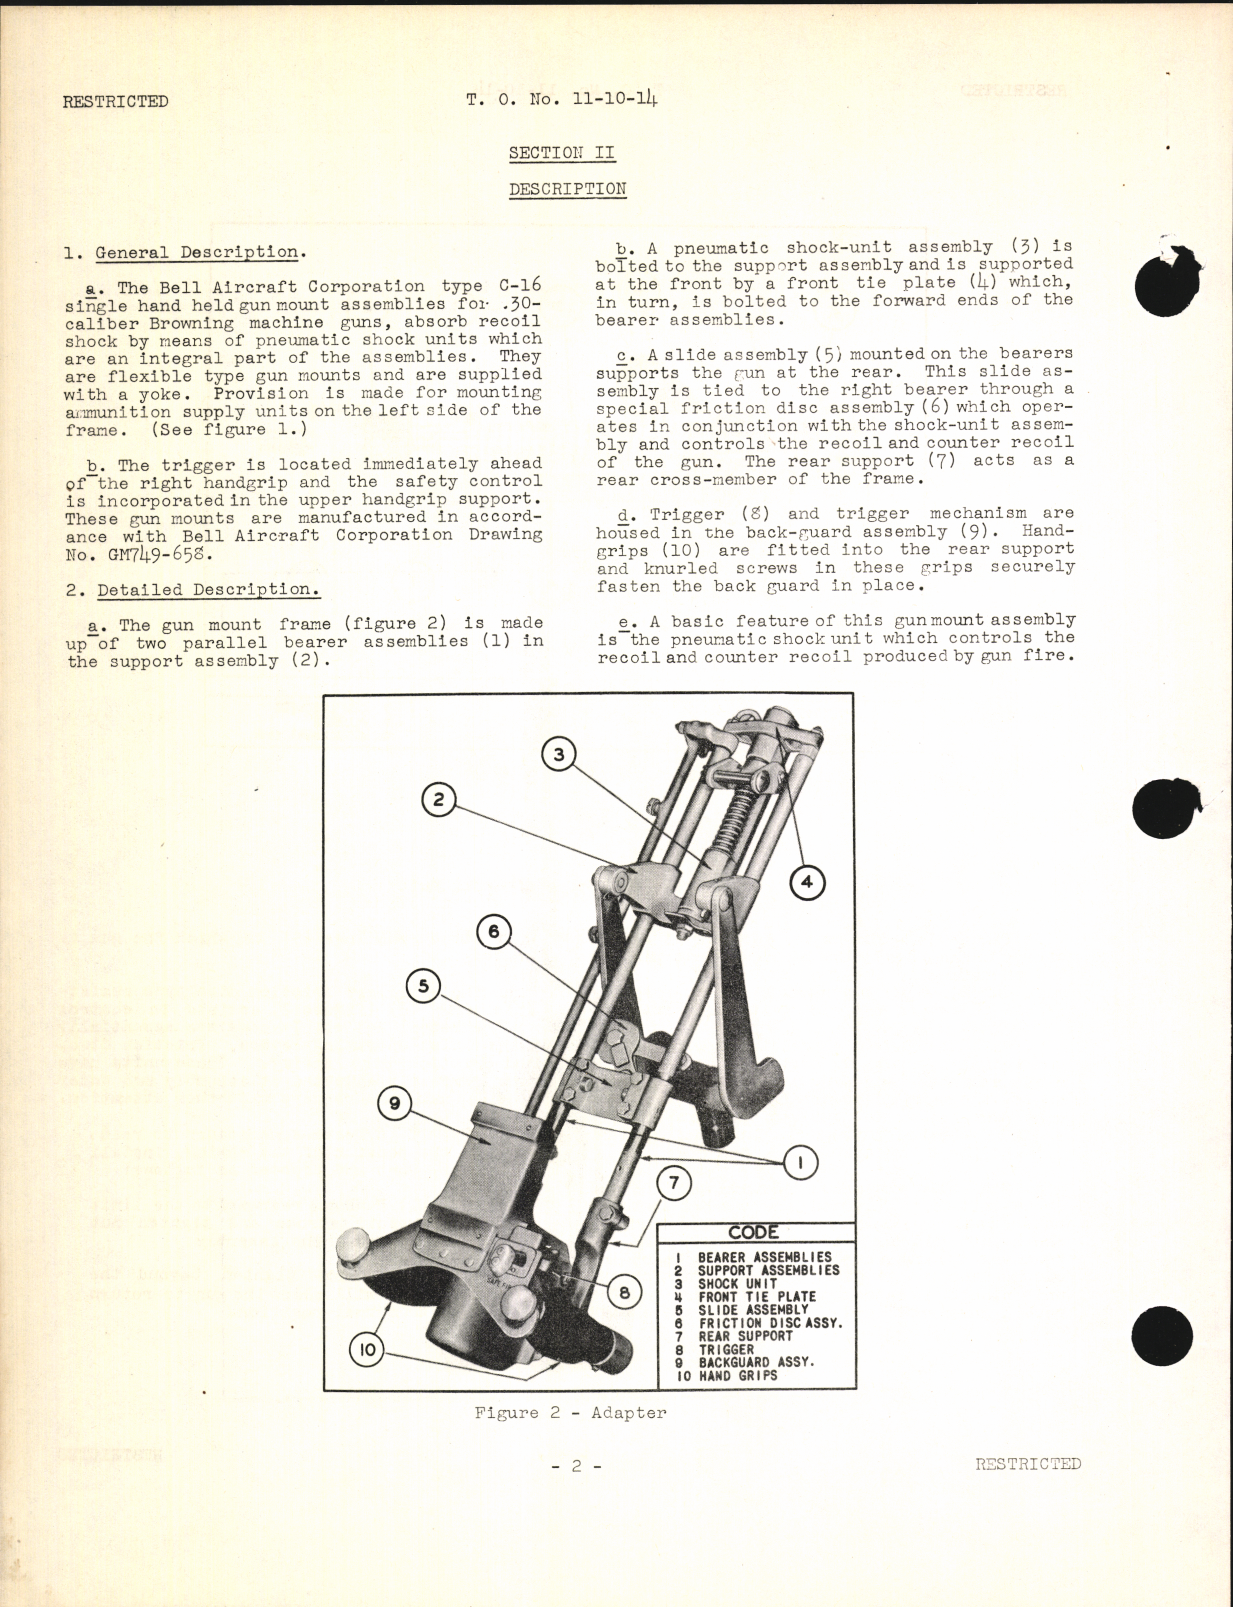 Sample page 6 from AirCorps Library document: Handbook of Instructions with Parts Catalog for Type C-16 Single Gun Mount Adapter